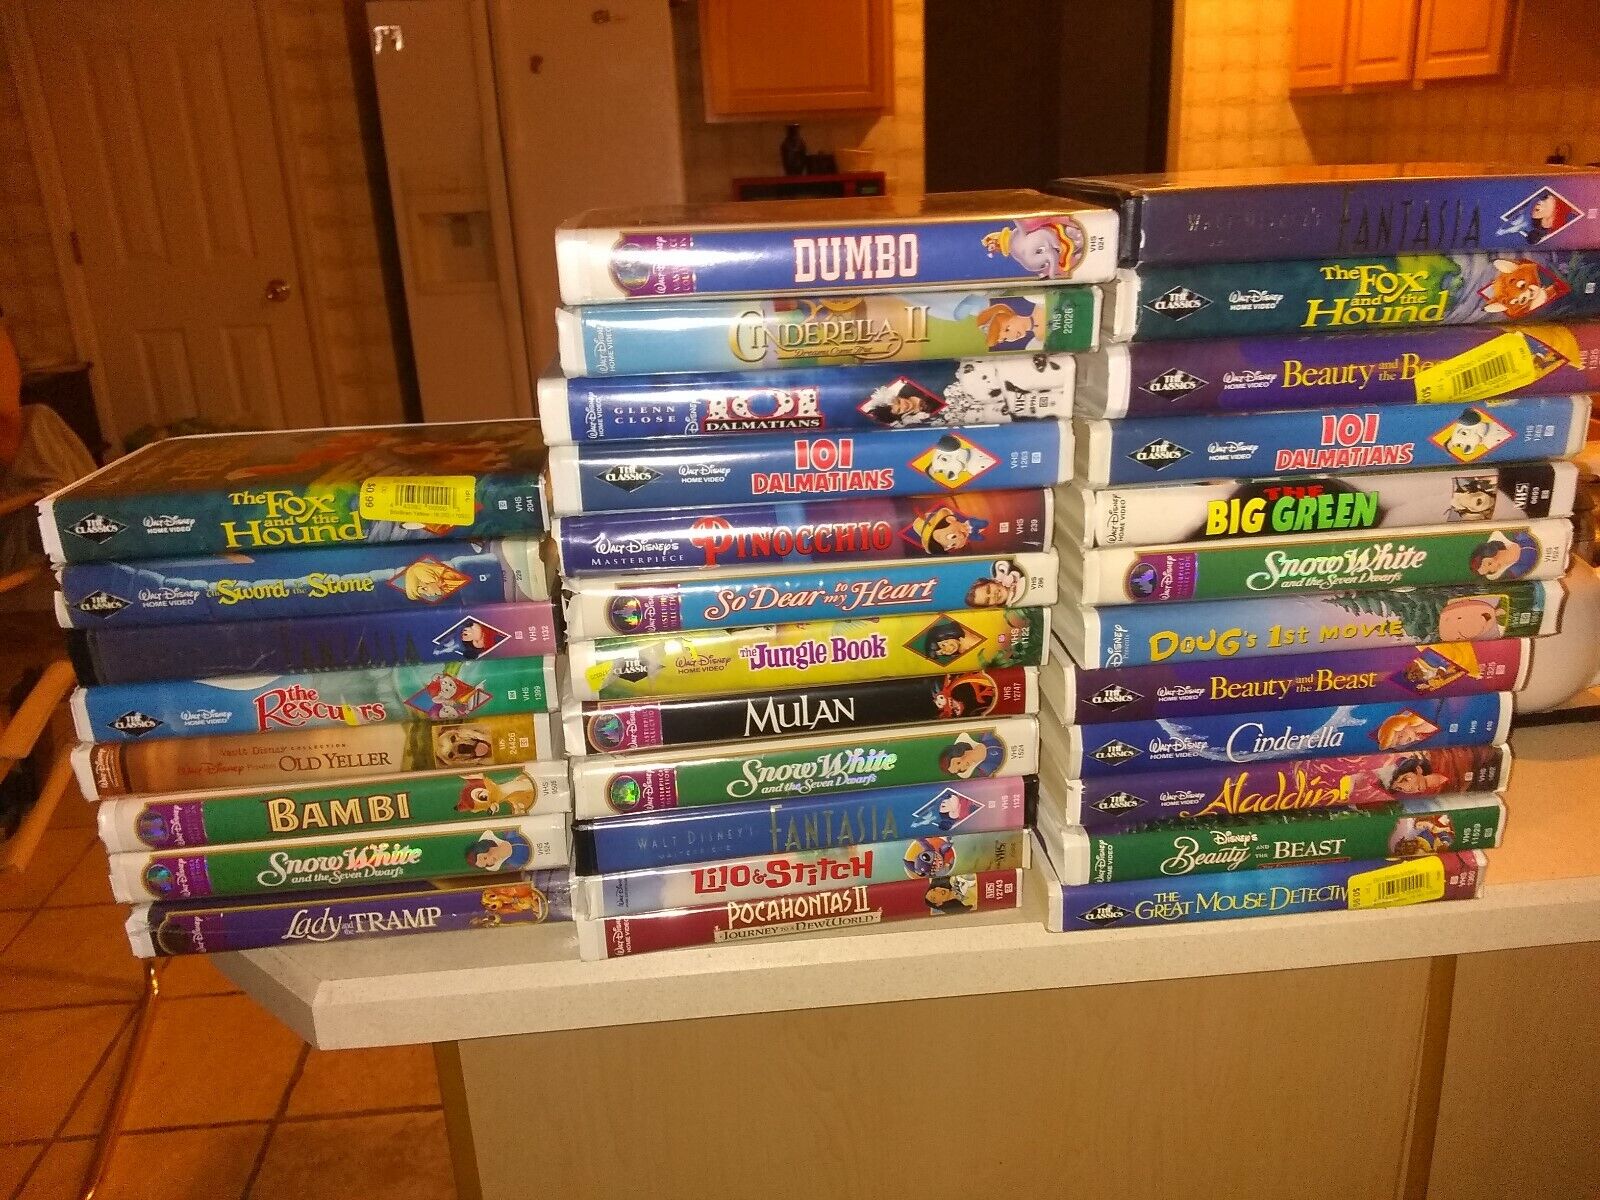 Walt Disney\'s Lot of 5 VHS Movies, You Pick from the List, not photos B1L1